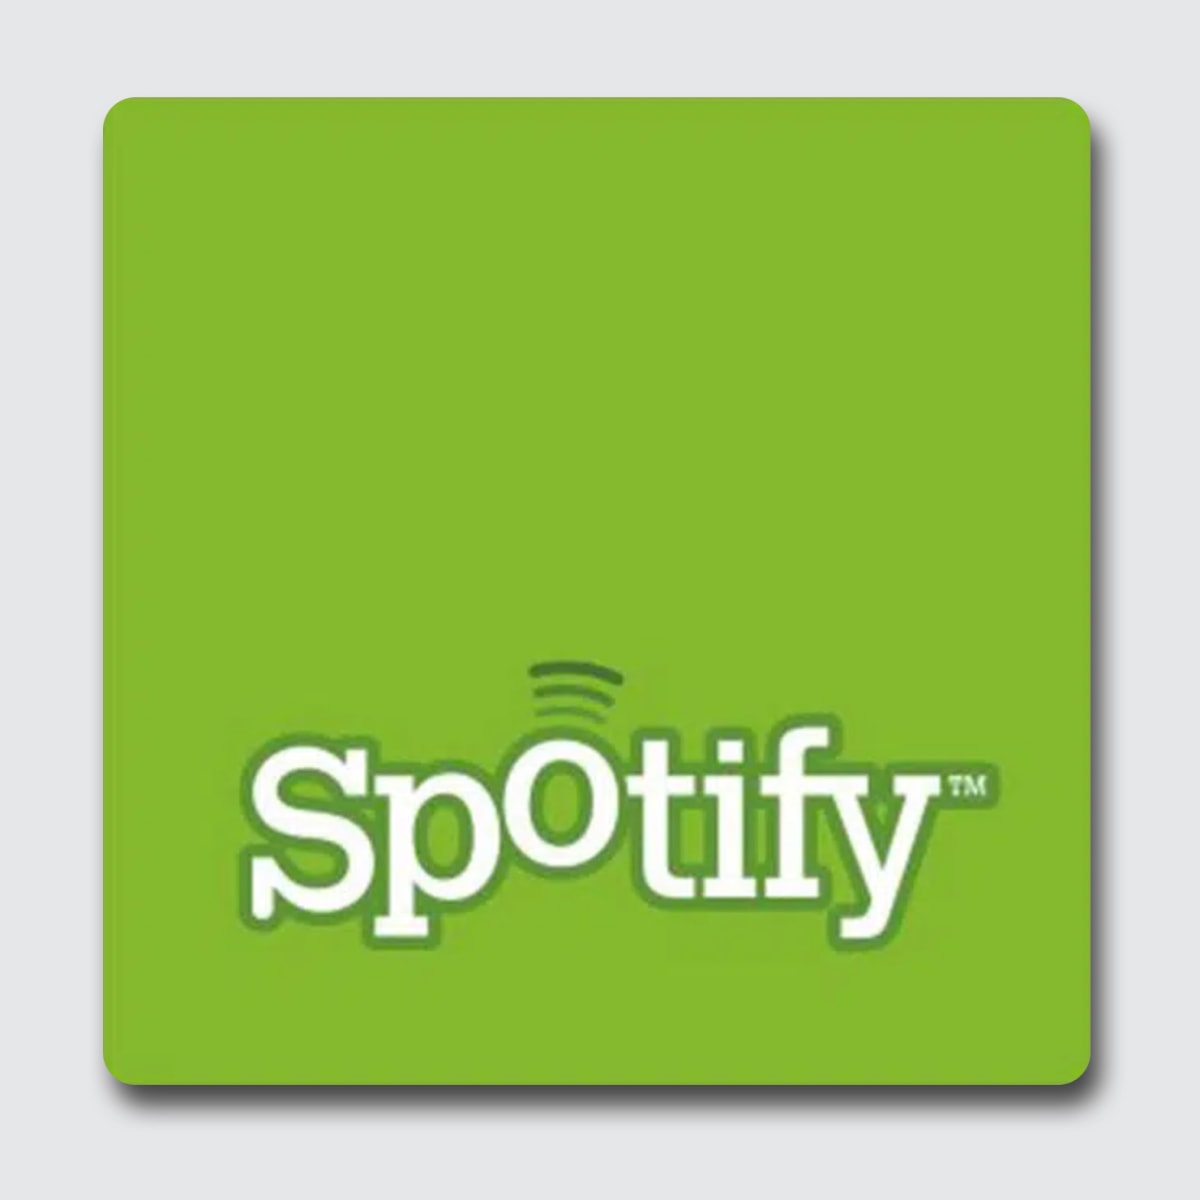 The Spotify logo: its history, meaning, and evolution